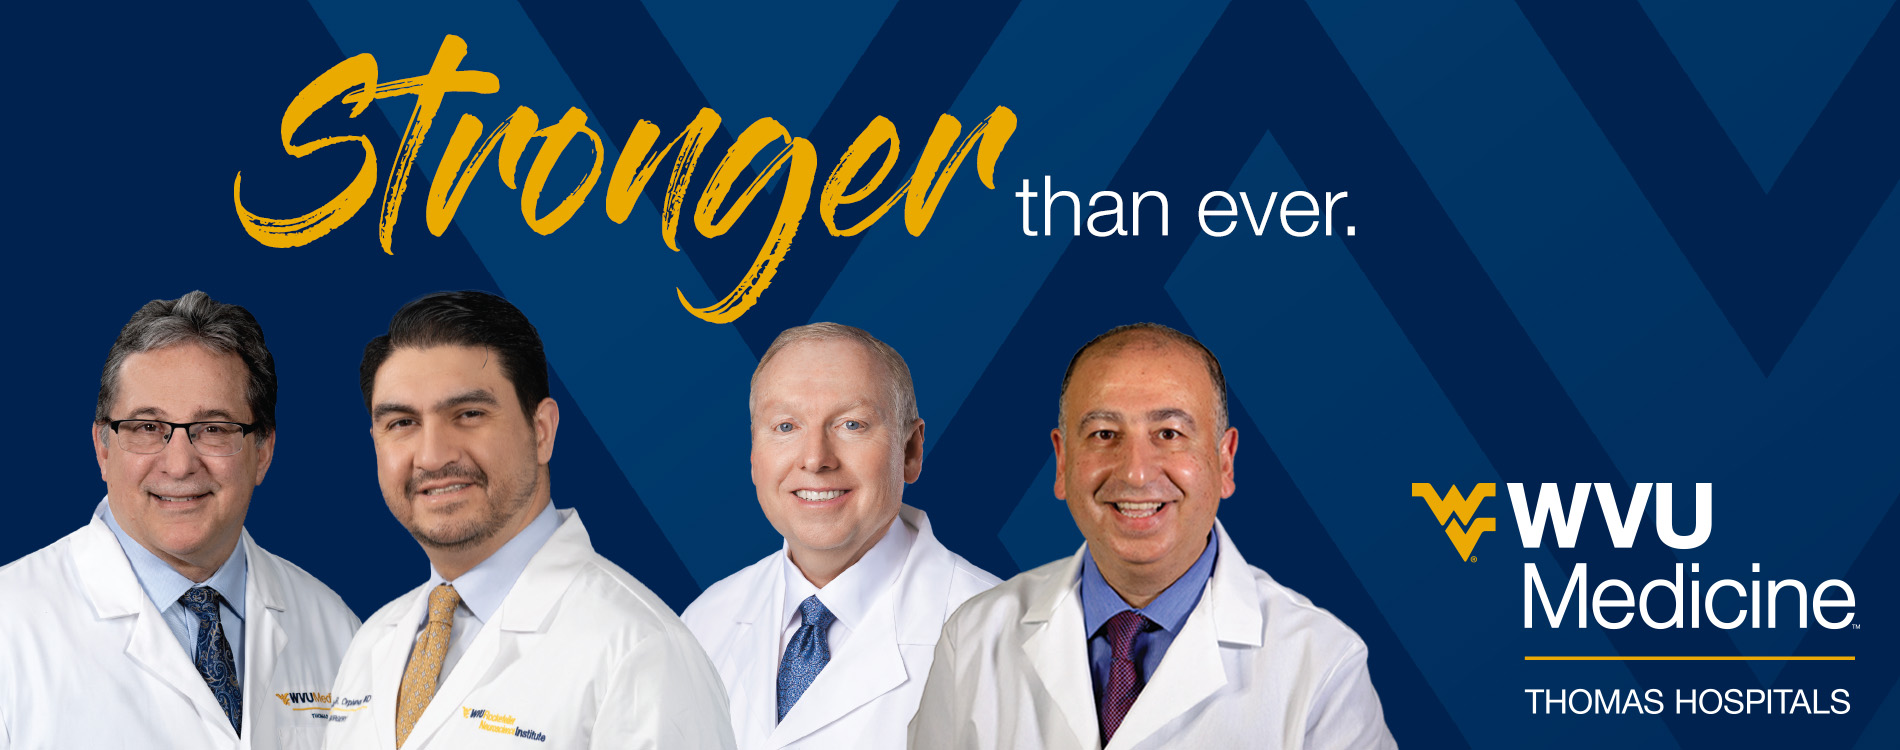 Stronger Than Ever Physicians you know and trust are joining our team Thomas Hospitals header image